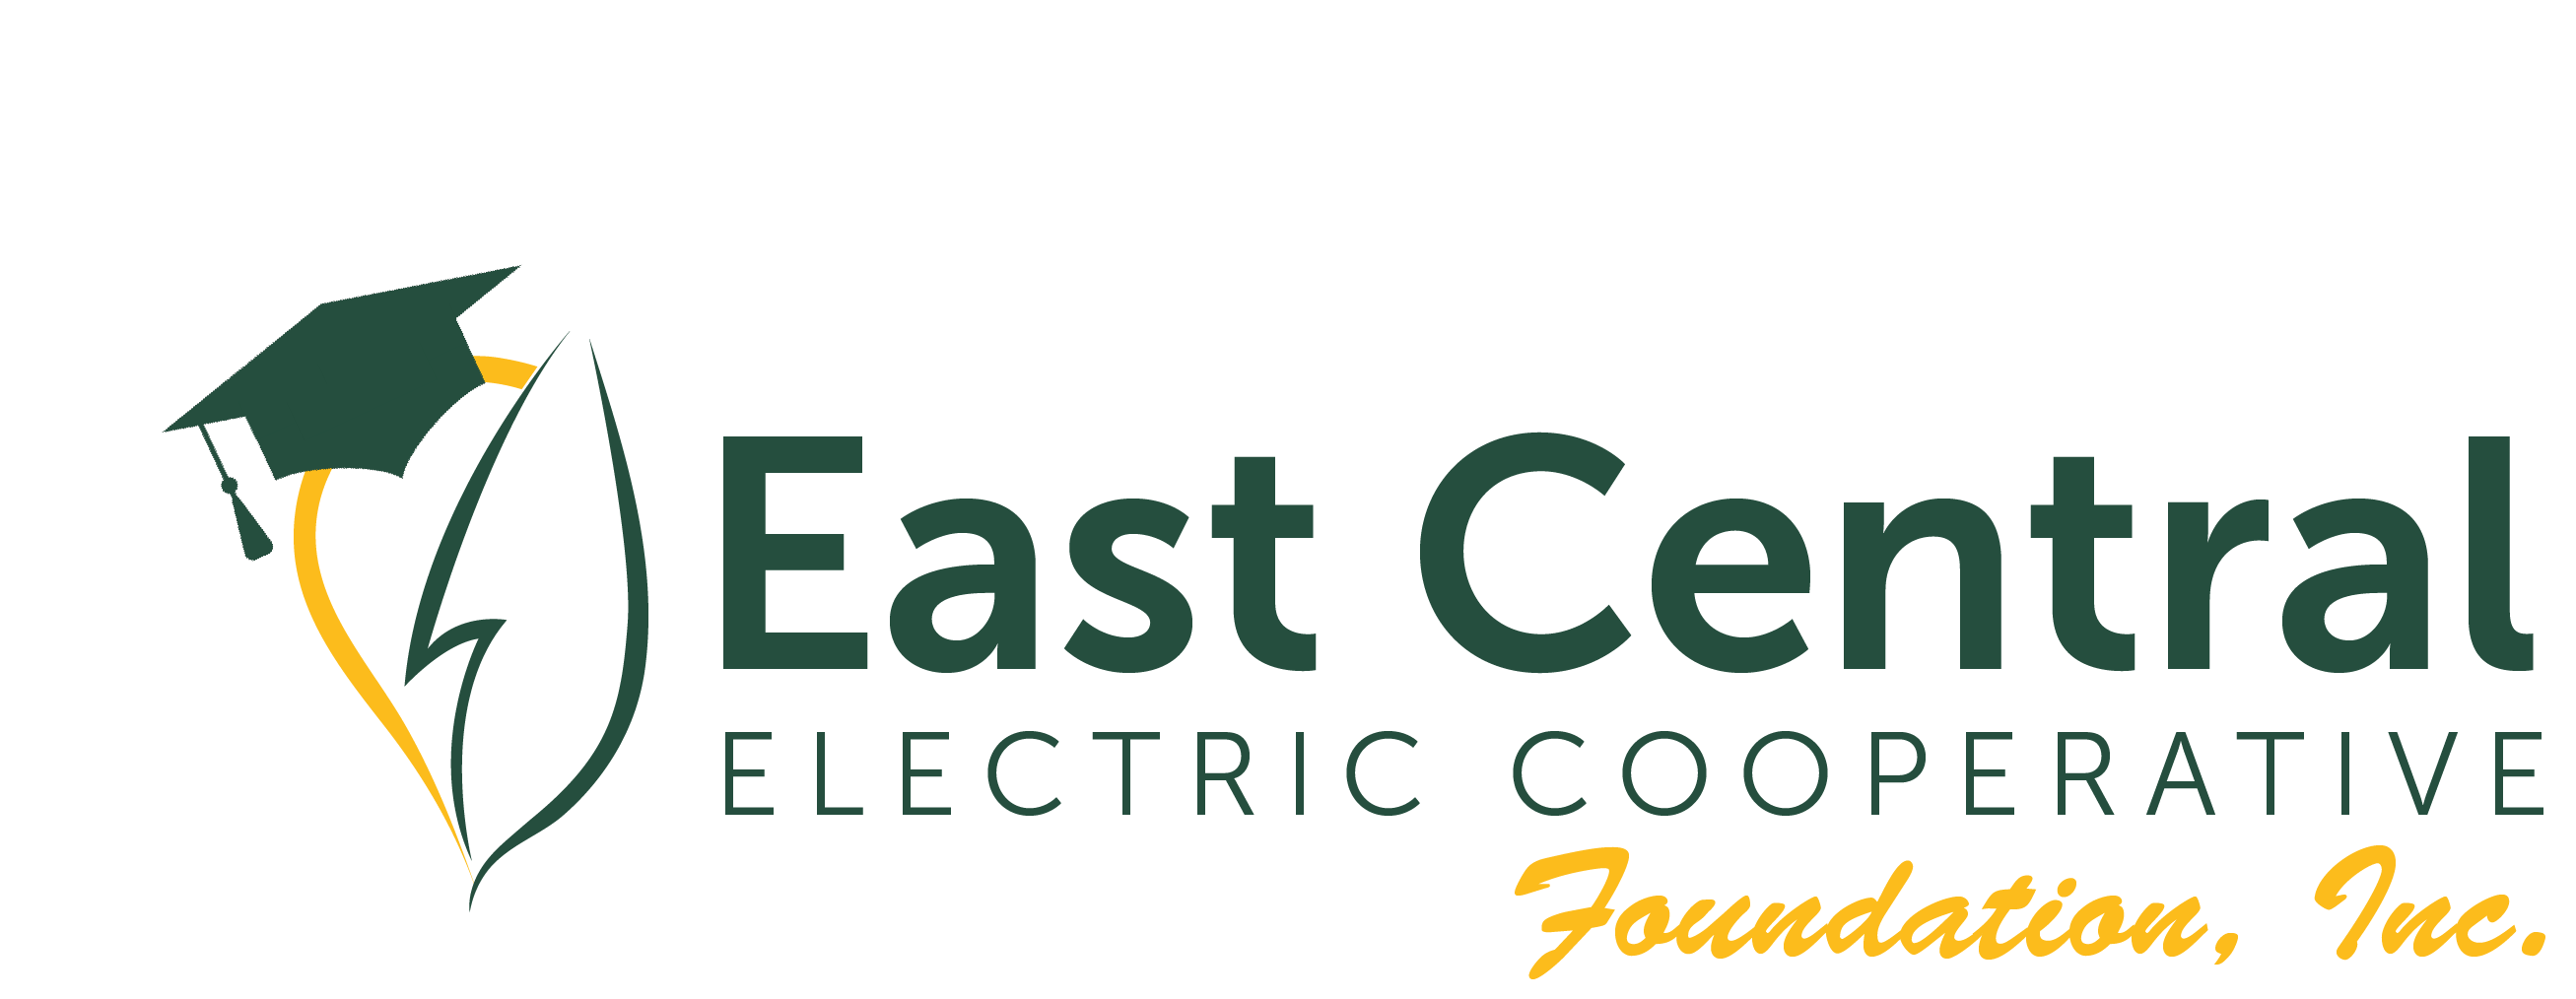 East Central Electric Cooperative Foundation Logo